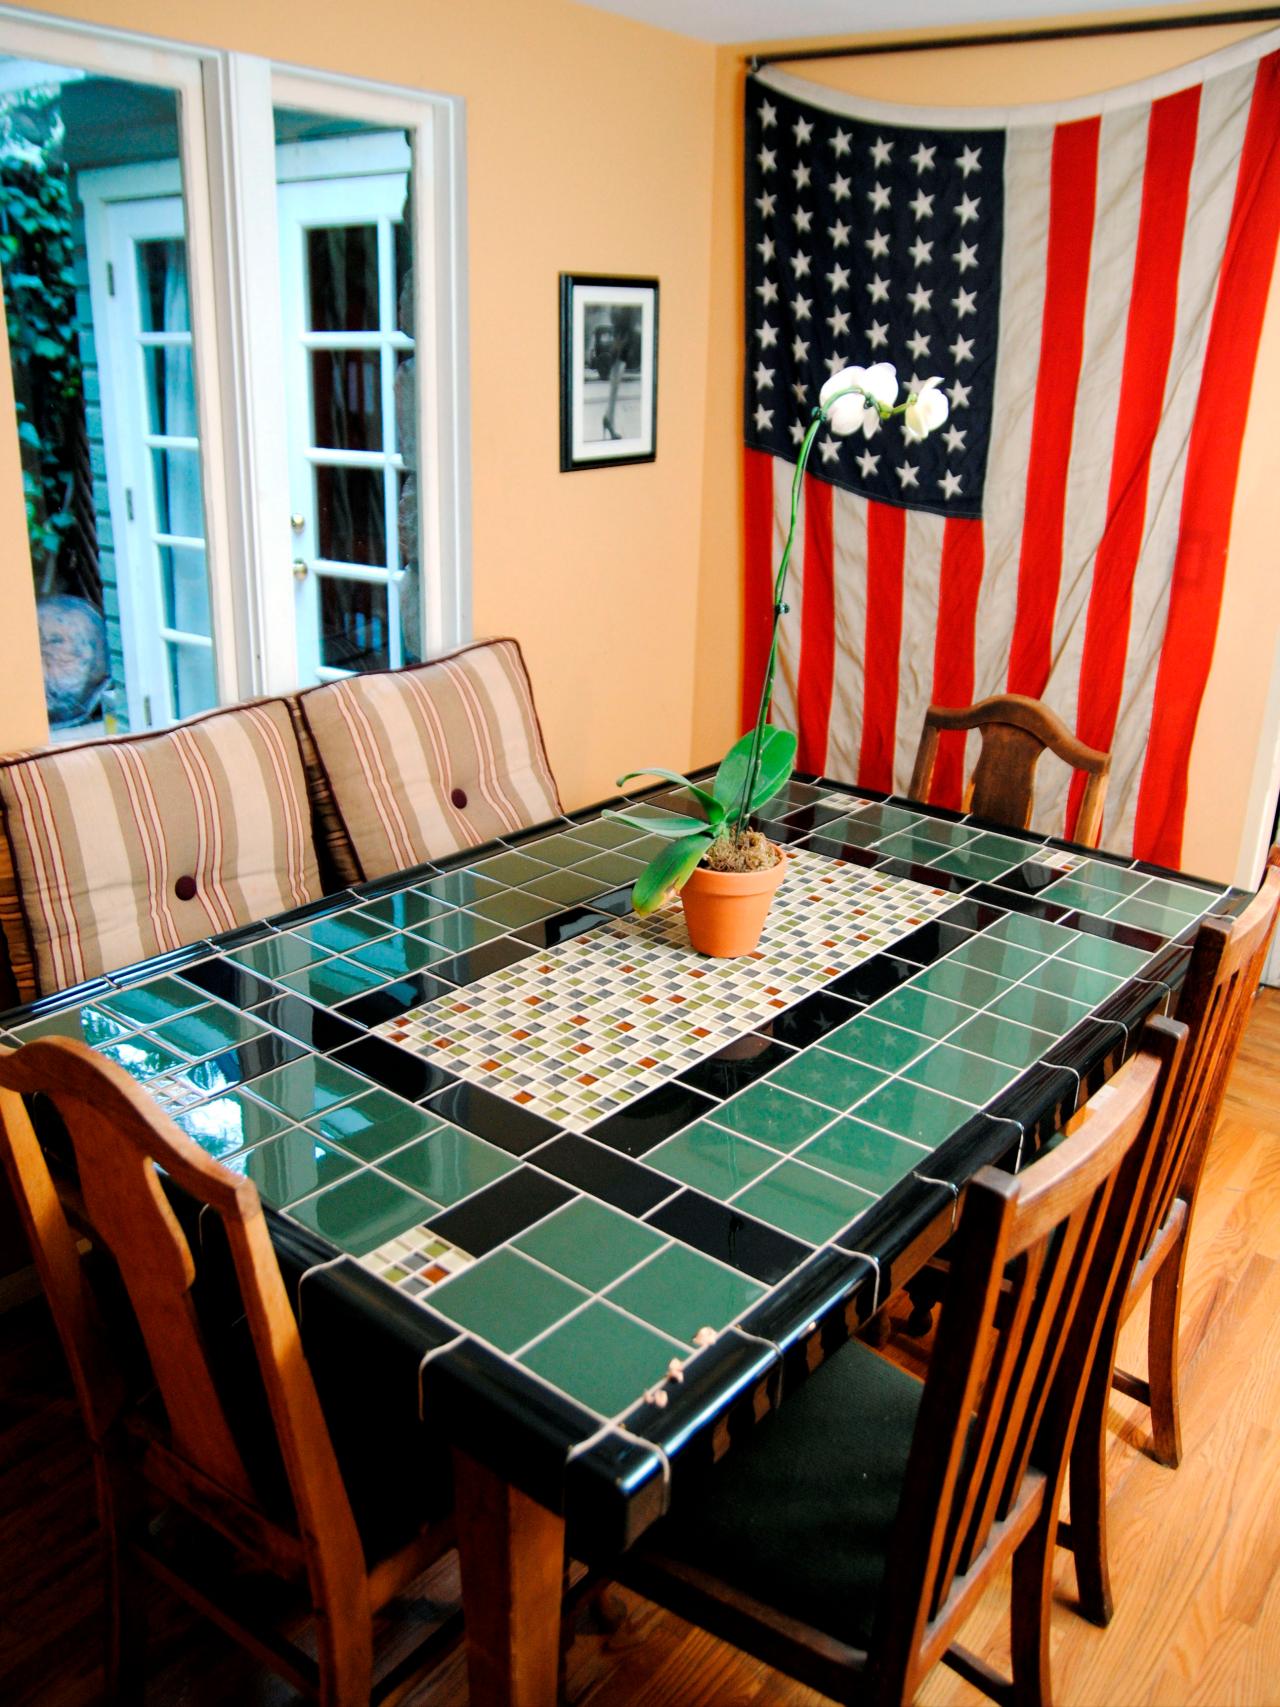 Create A Mosaic Tile Tabletop, Tile Top Kitchen Table And Chairs